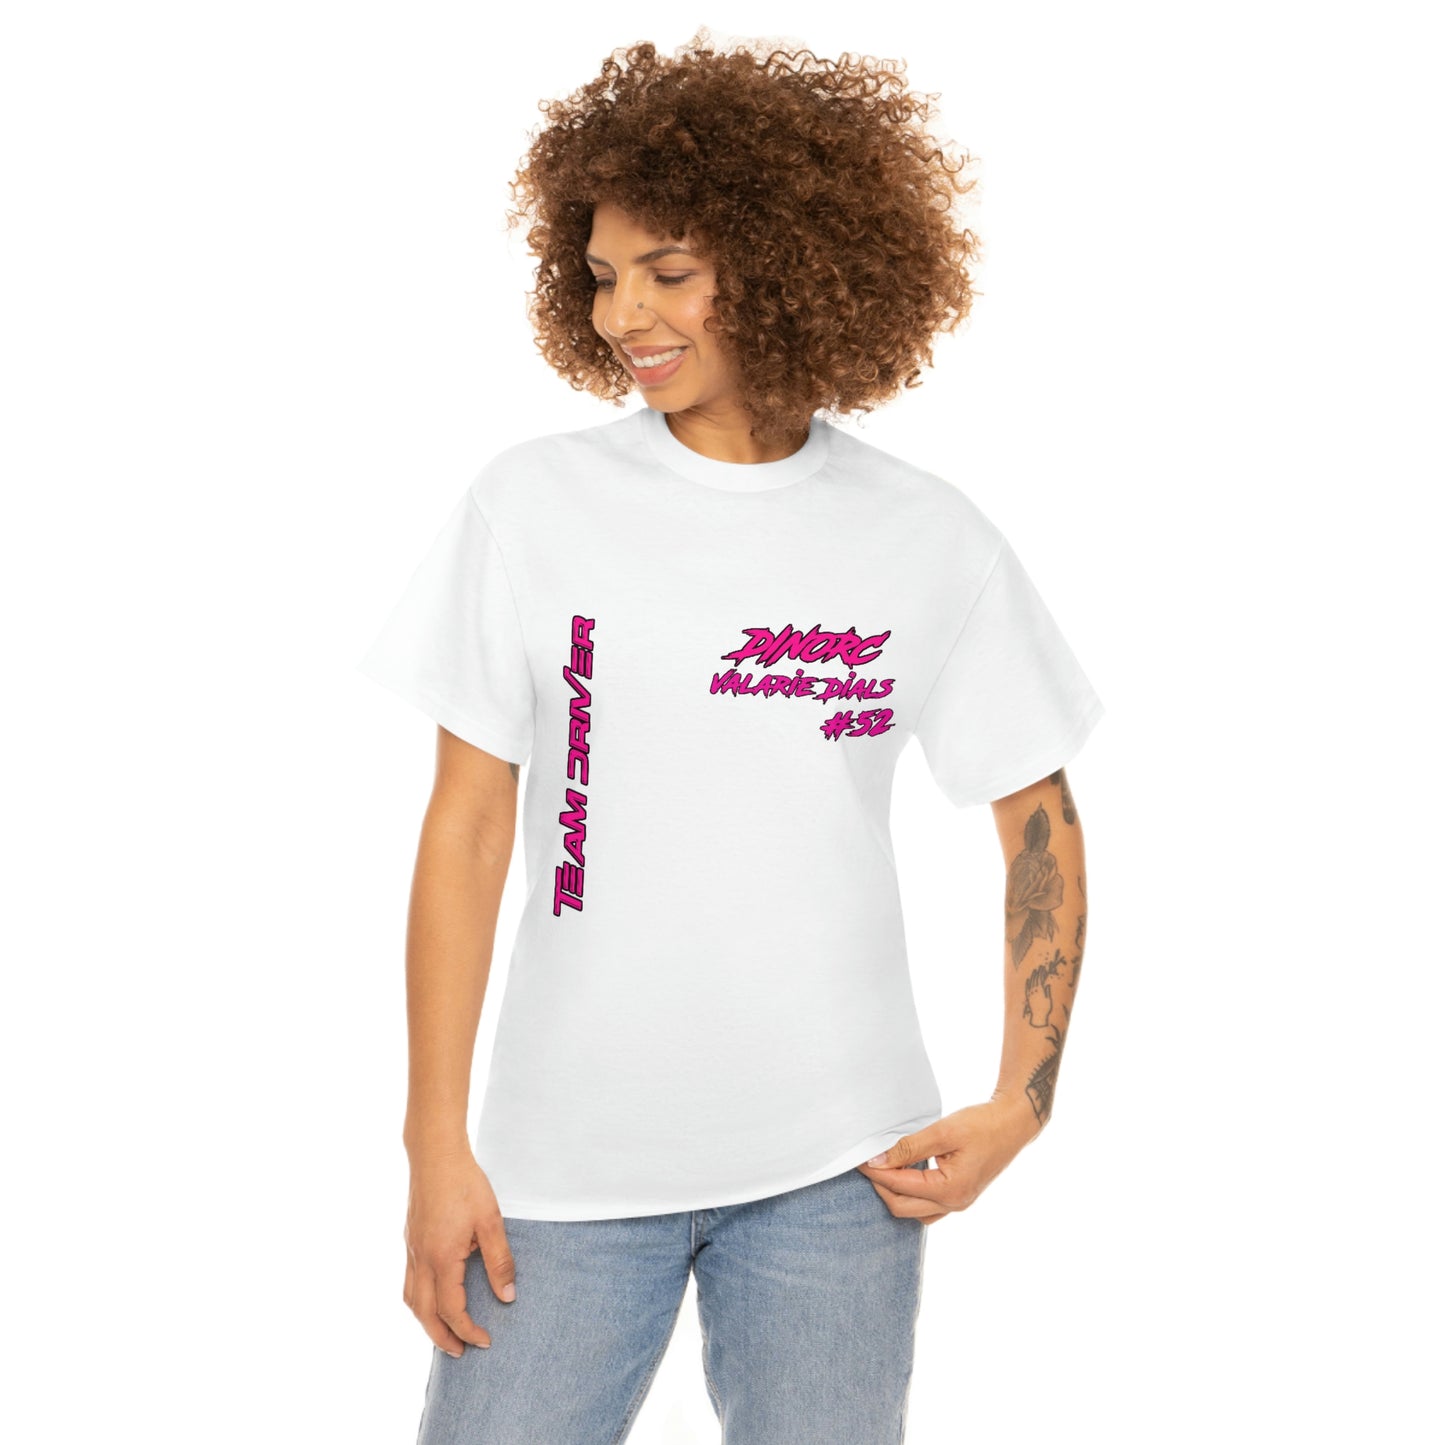 Team Driver Valarie Dials Dino's Divas Front and Back DinoRc Logo T-Shirt S-5x 5 colors